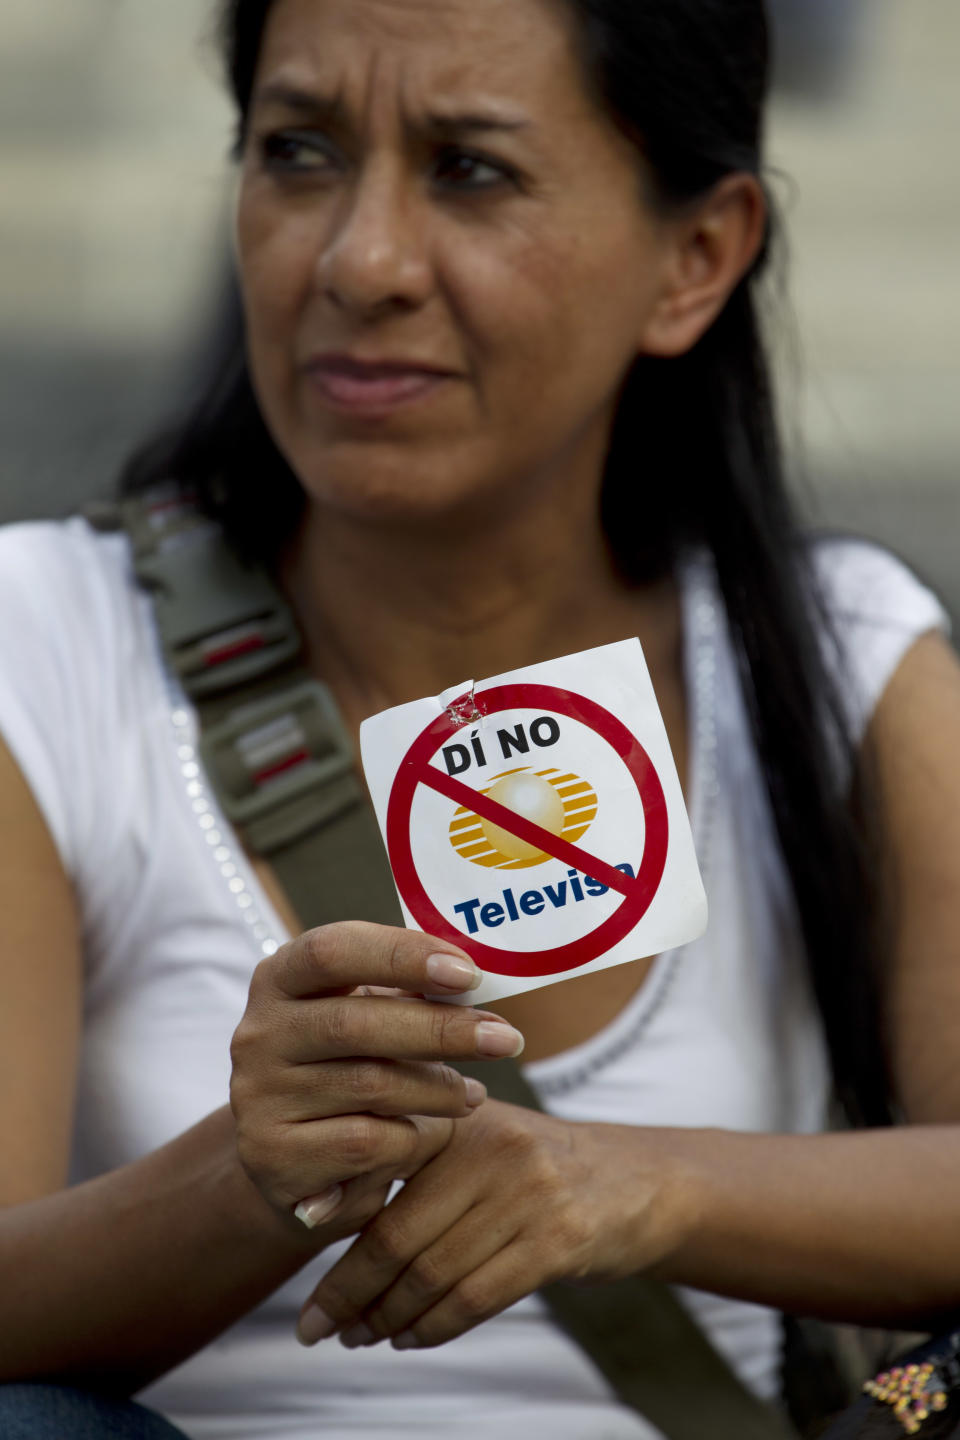 A woman holds a sign during a demonstration to protest a possible return of the old ruling Institutional Revolutionary Party (PRI) and against what is perceived as a biased coverage by major Mexican TV networks directed in favor of PRI's candidate Enrique Pena Nieto in Mexico City, Wednesday, May 23, 2012. Mexico will hold presidential elections on July 1. The sticker reads in Spanish: "Say No to Televisa". (AP Photo/Eduardo Verdugo)